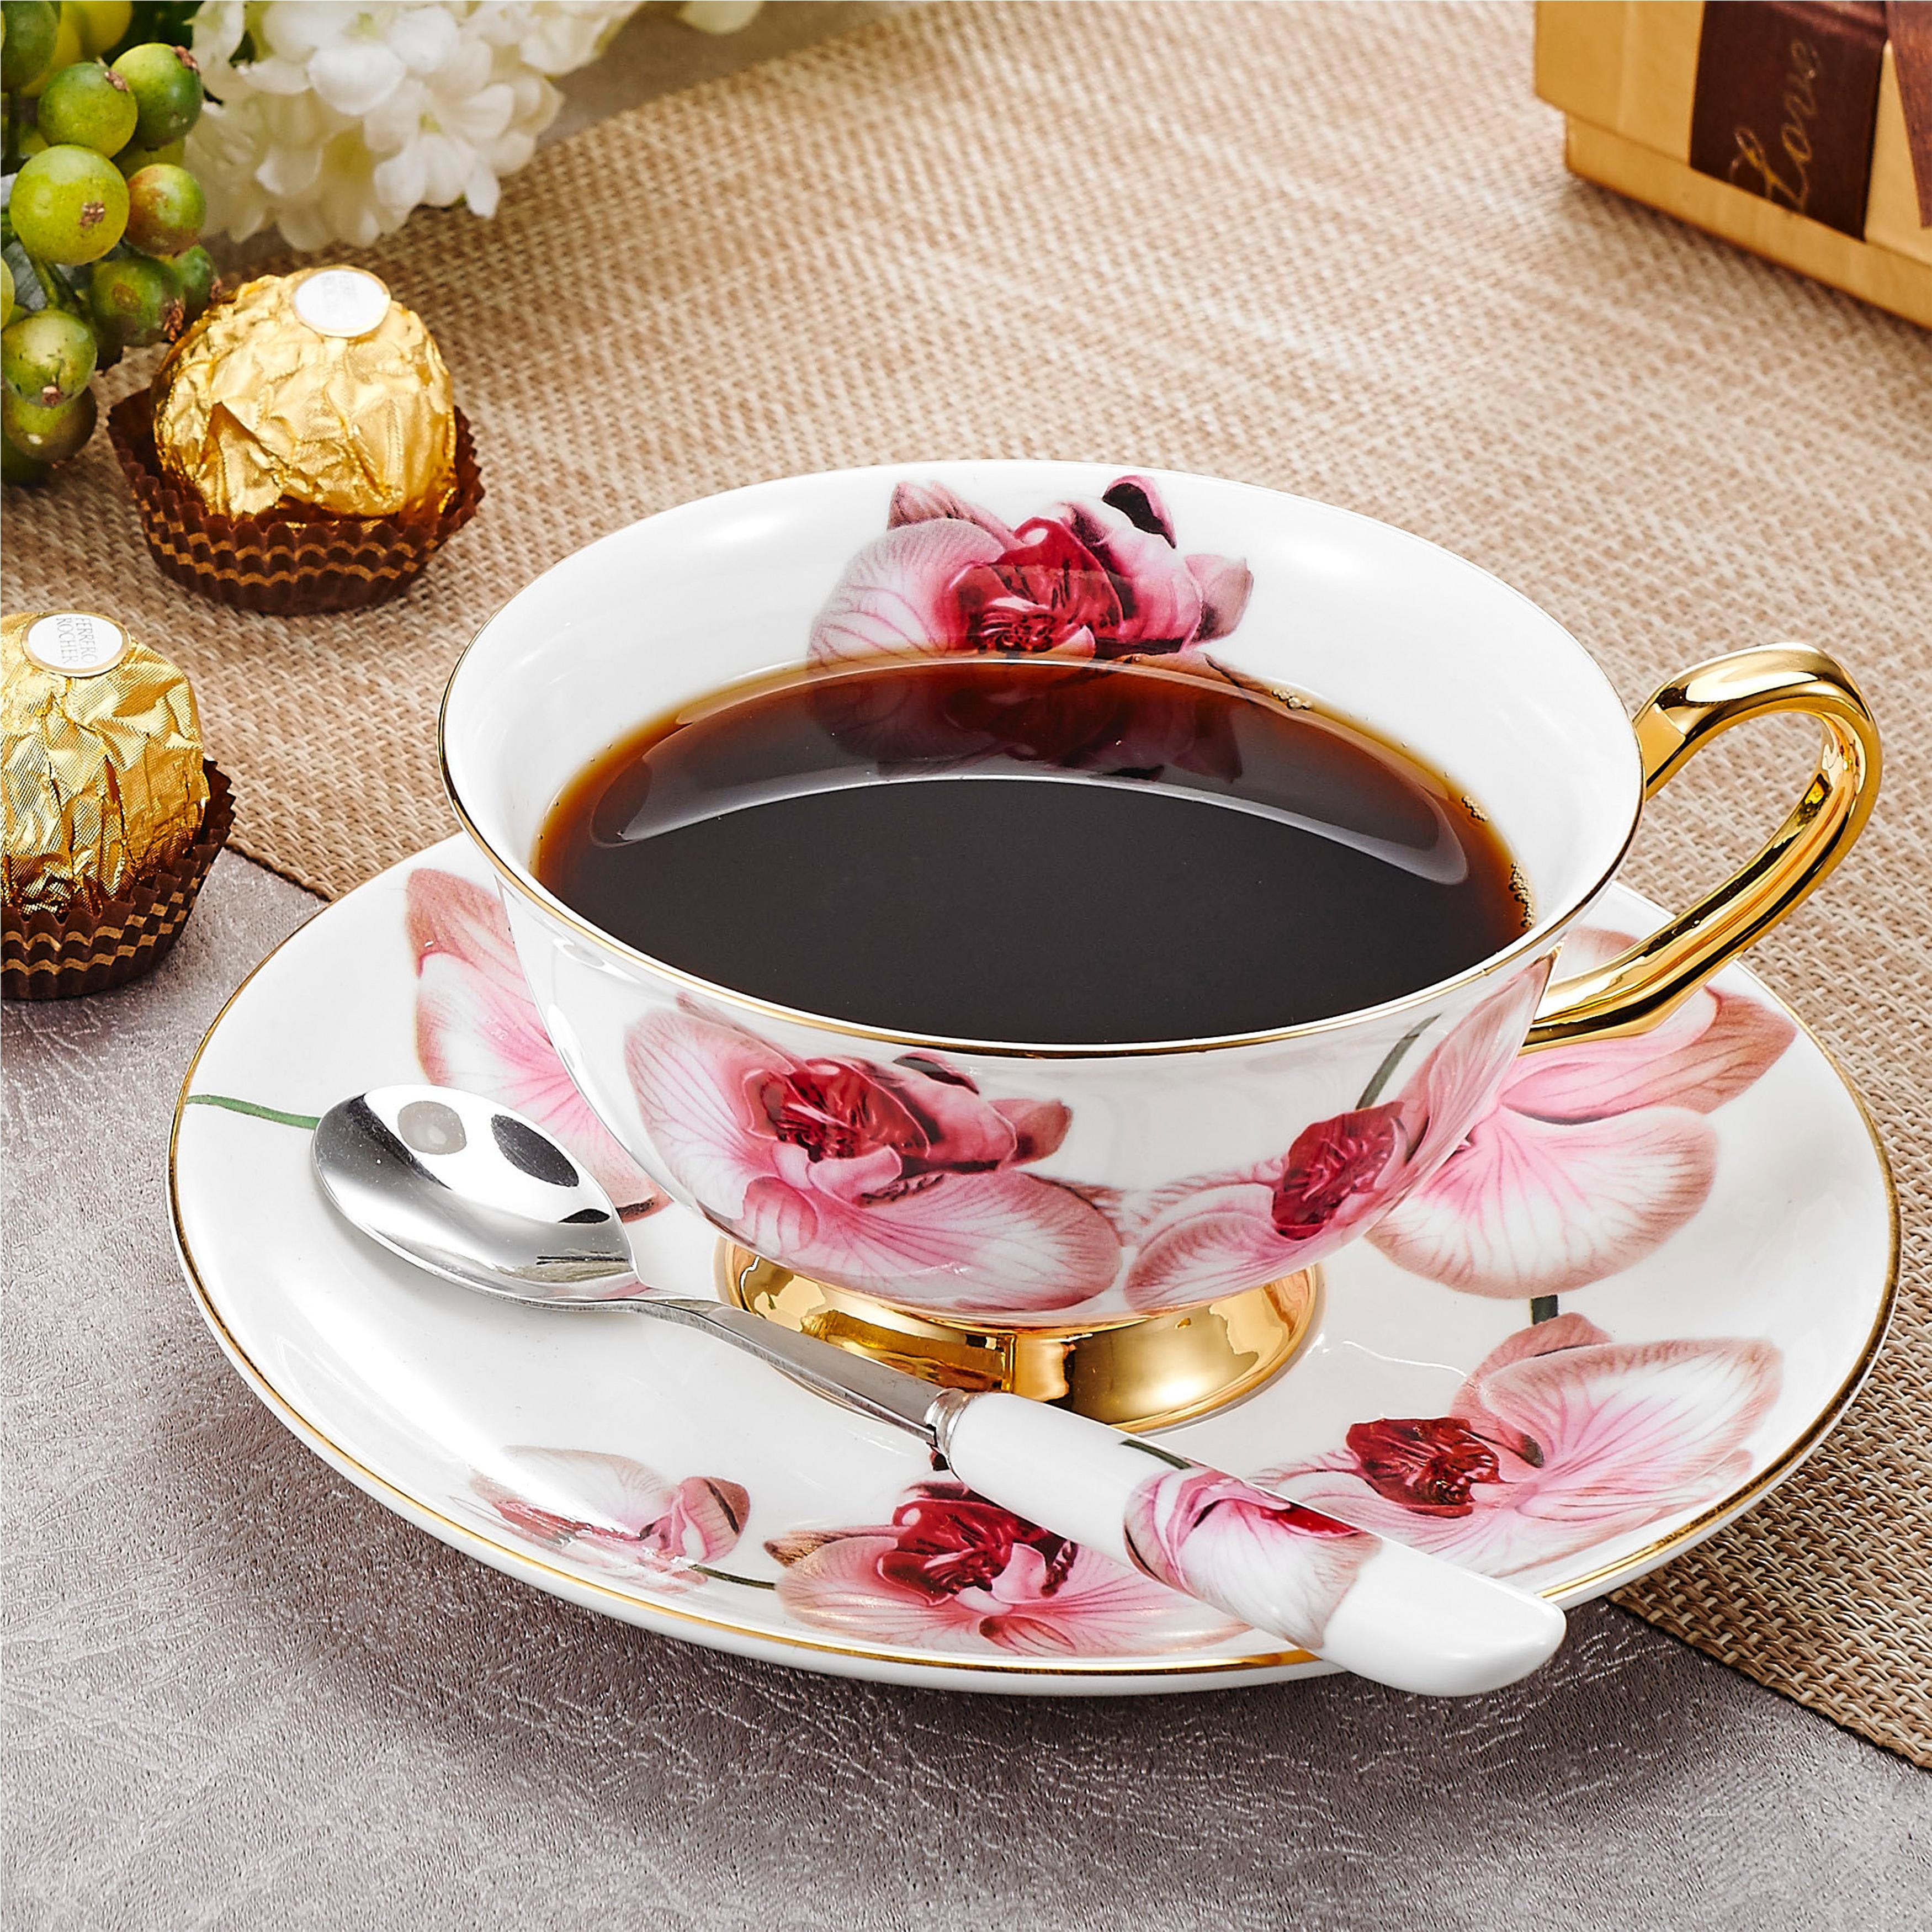 https://ak1.ostkcdn.com/images/products/is/images/direct/045547e2a17e8726f1ecffa5932bbefa4a71df8e/3-Piece-Tea-Cup-and-Saucer-Set-with-Spoon%2C-6.8-Ounce-Coffee-Cup-Set.jpg